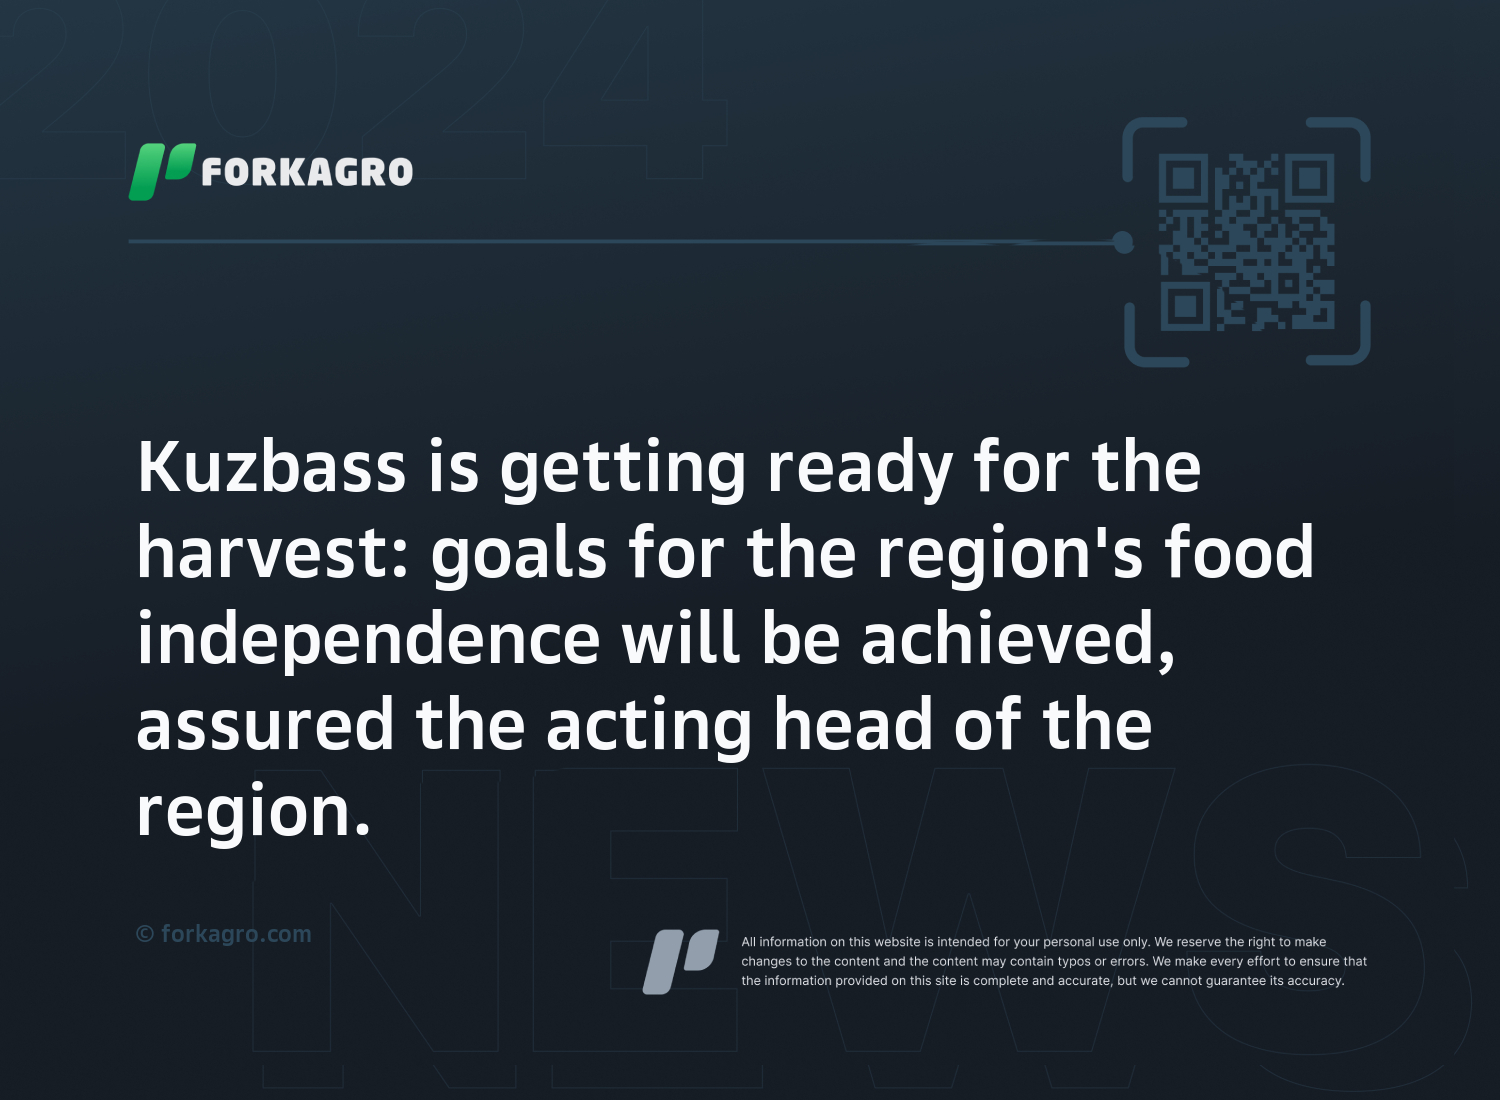 Kuzbass is getting ready for the harvest: goals for the region's food independence will be achieved, assured the acting head of the region.